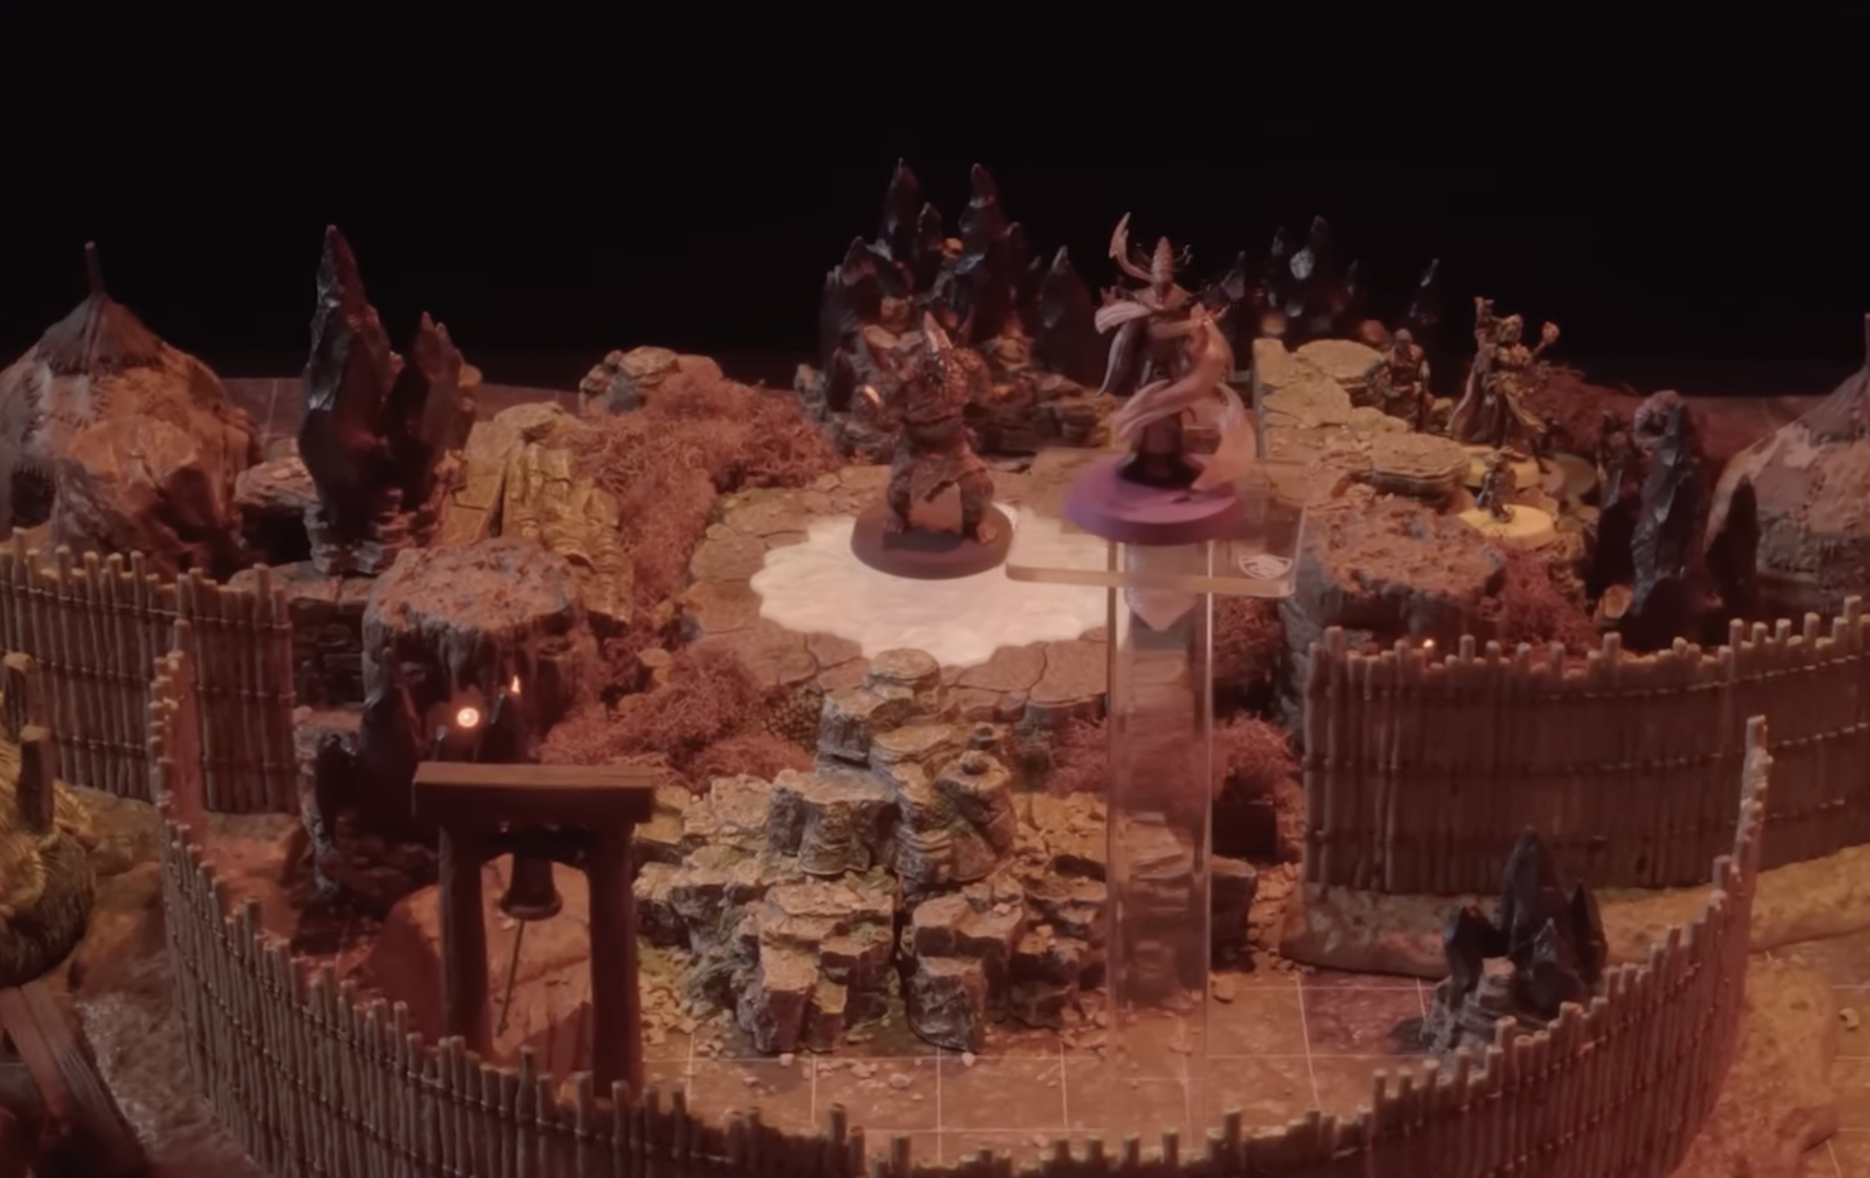 A battlemap of a fenced encampment built around a portal on the ground. A large Reiloran stands on the portal while another flies above in the foreground.